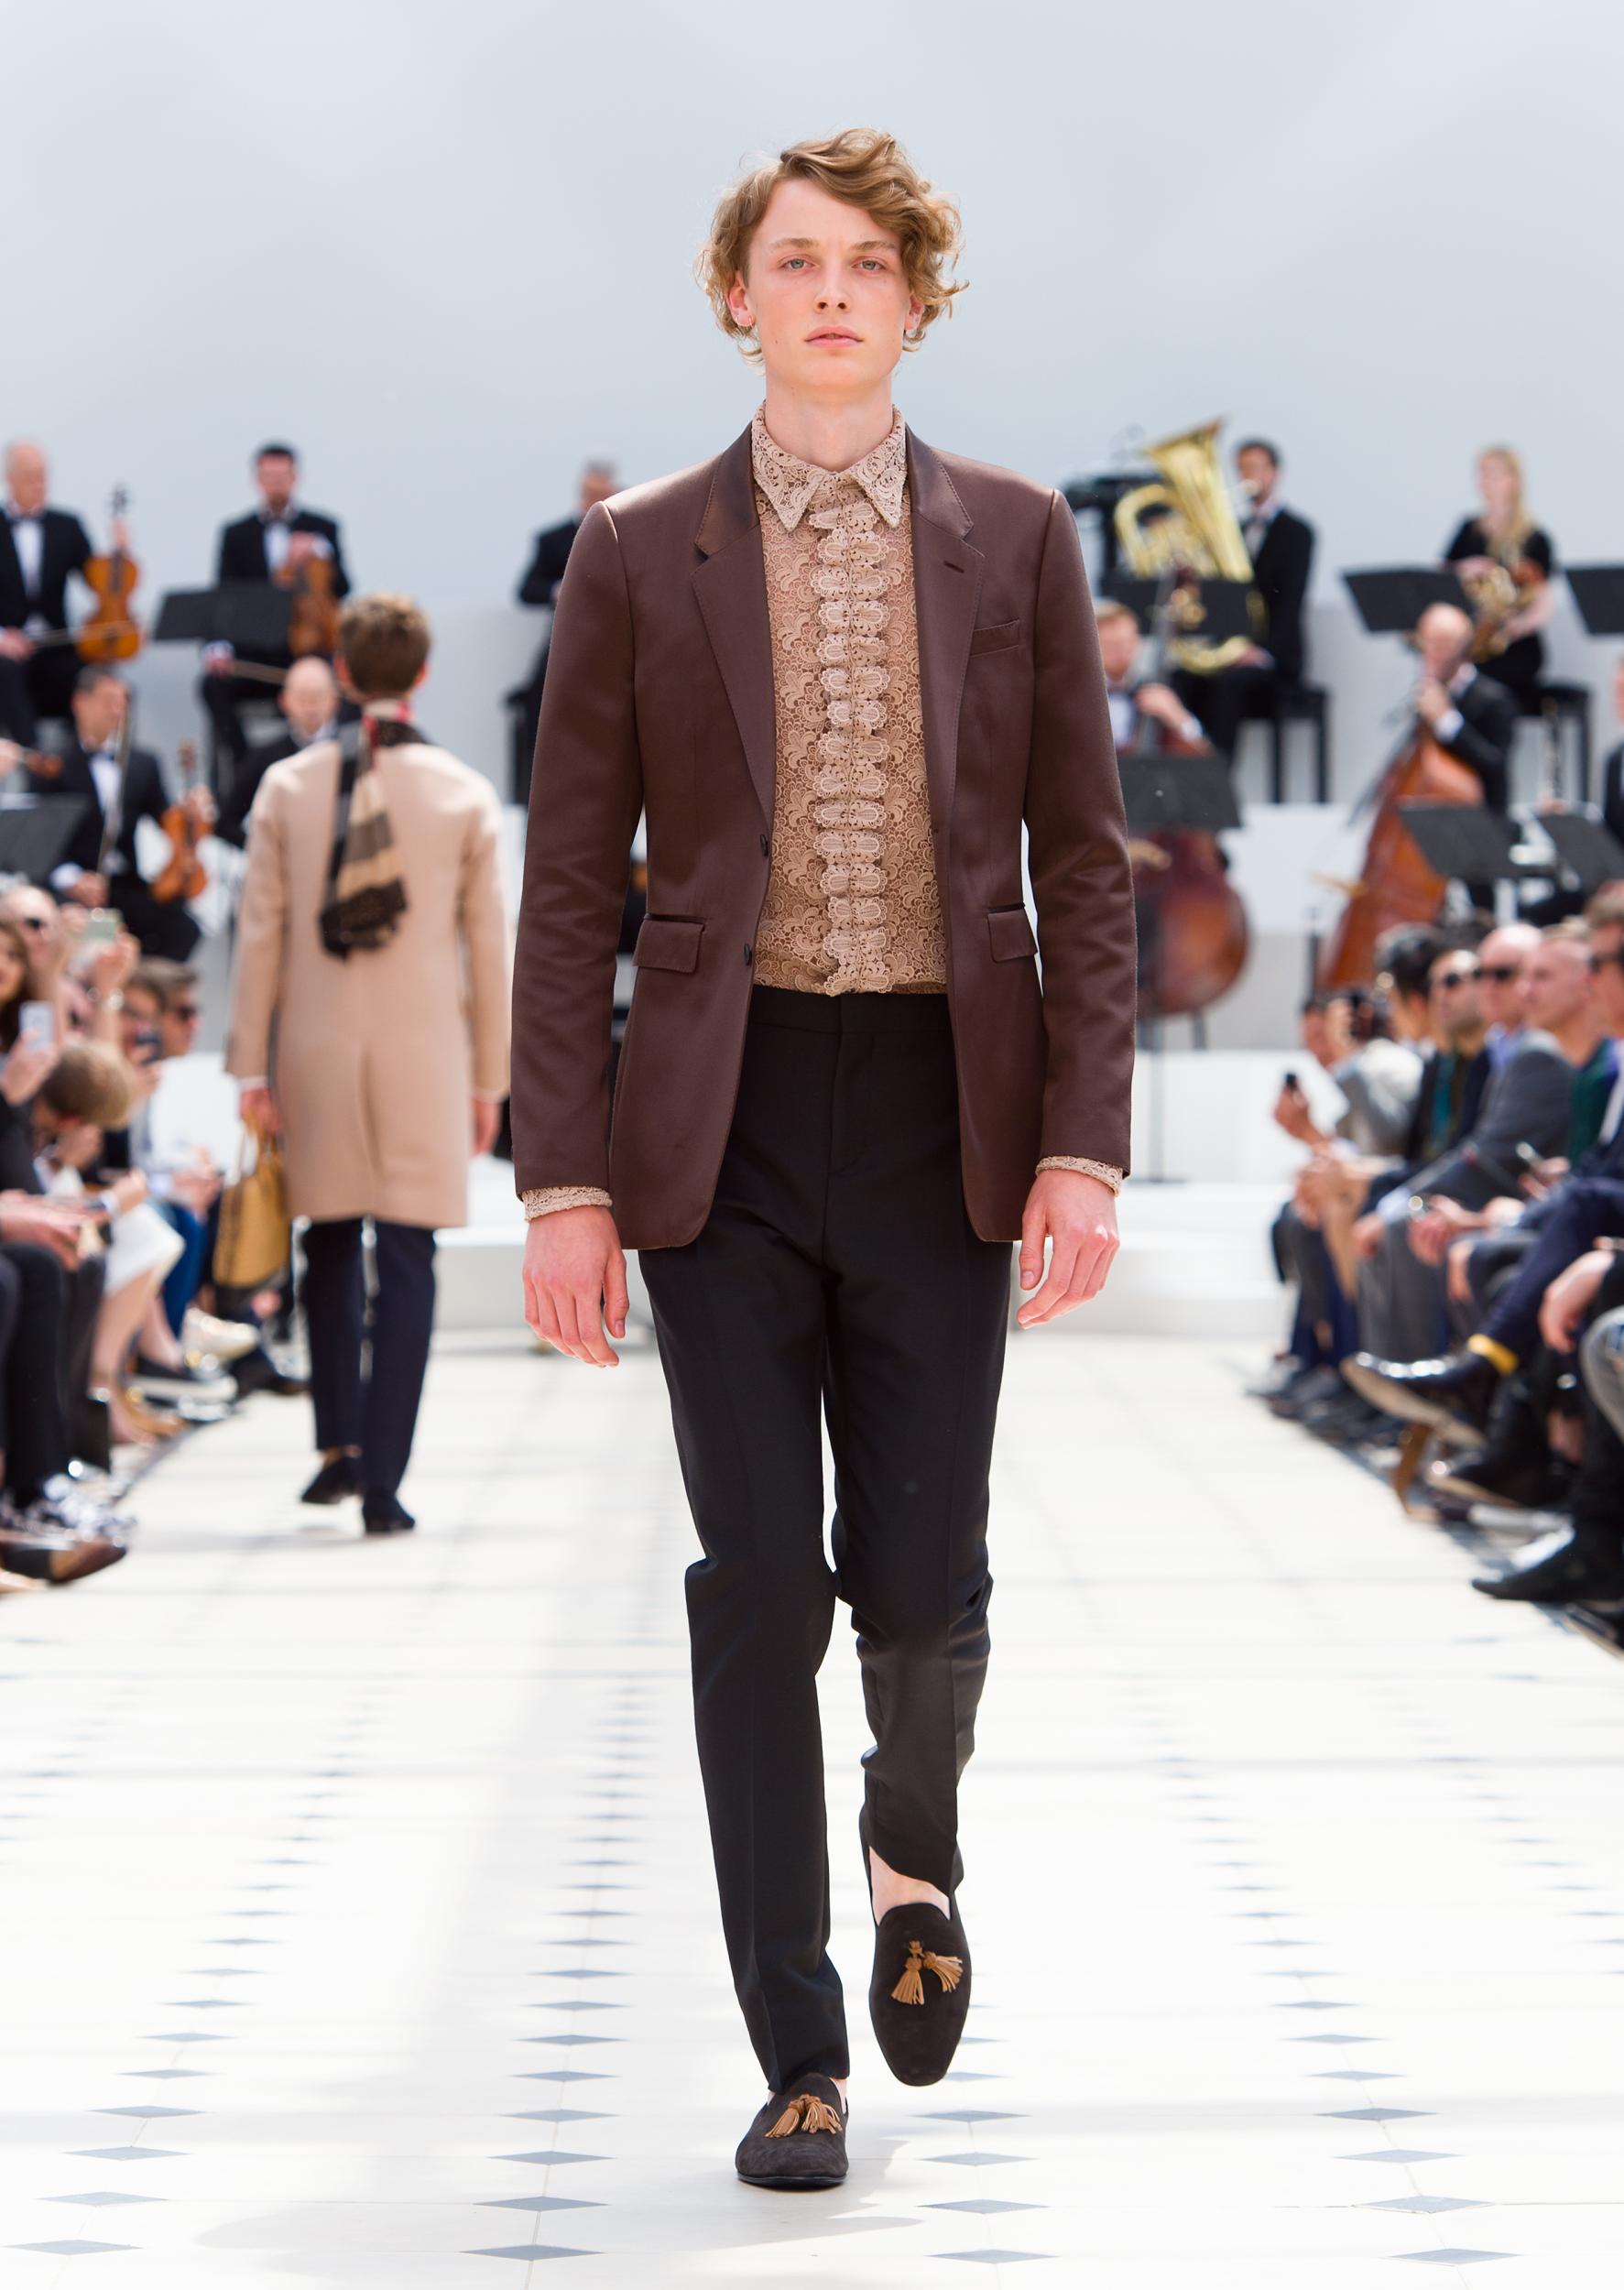 Menswear embraces it's feminine lashings of | The Independent | The Independent